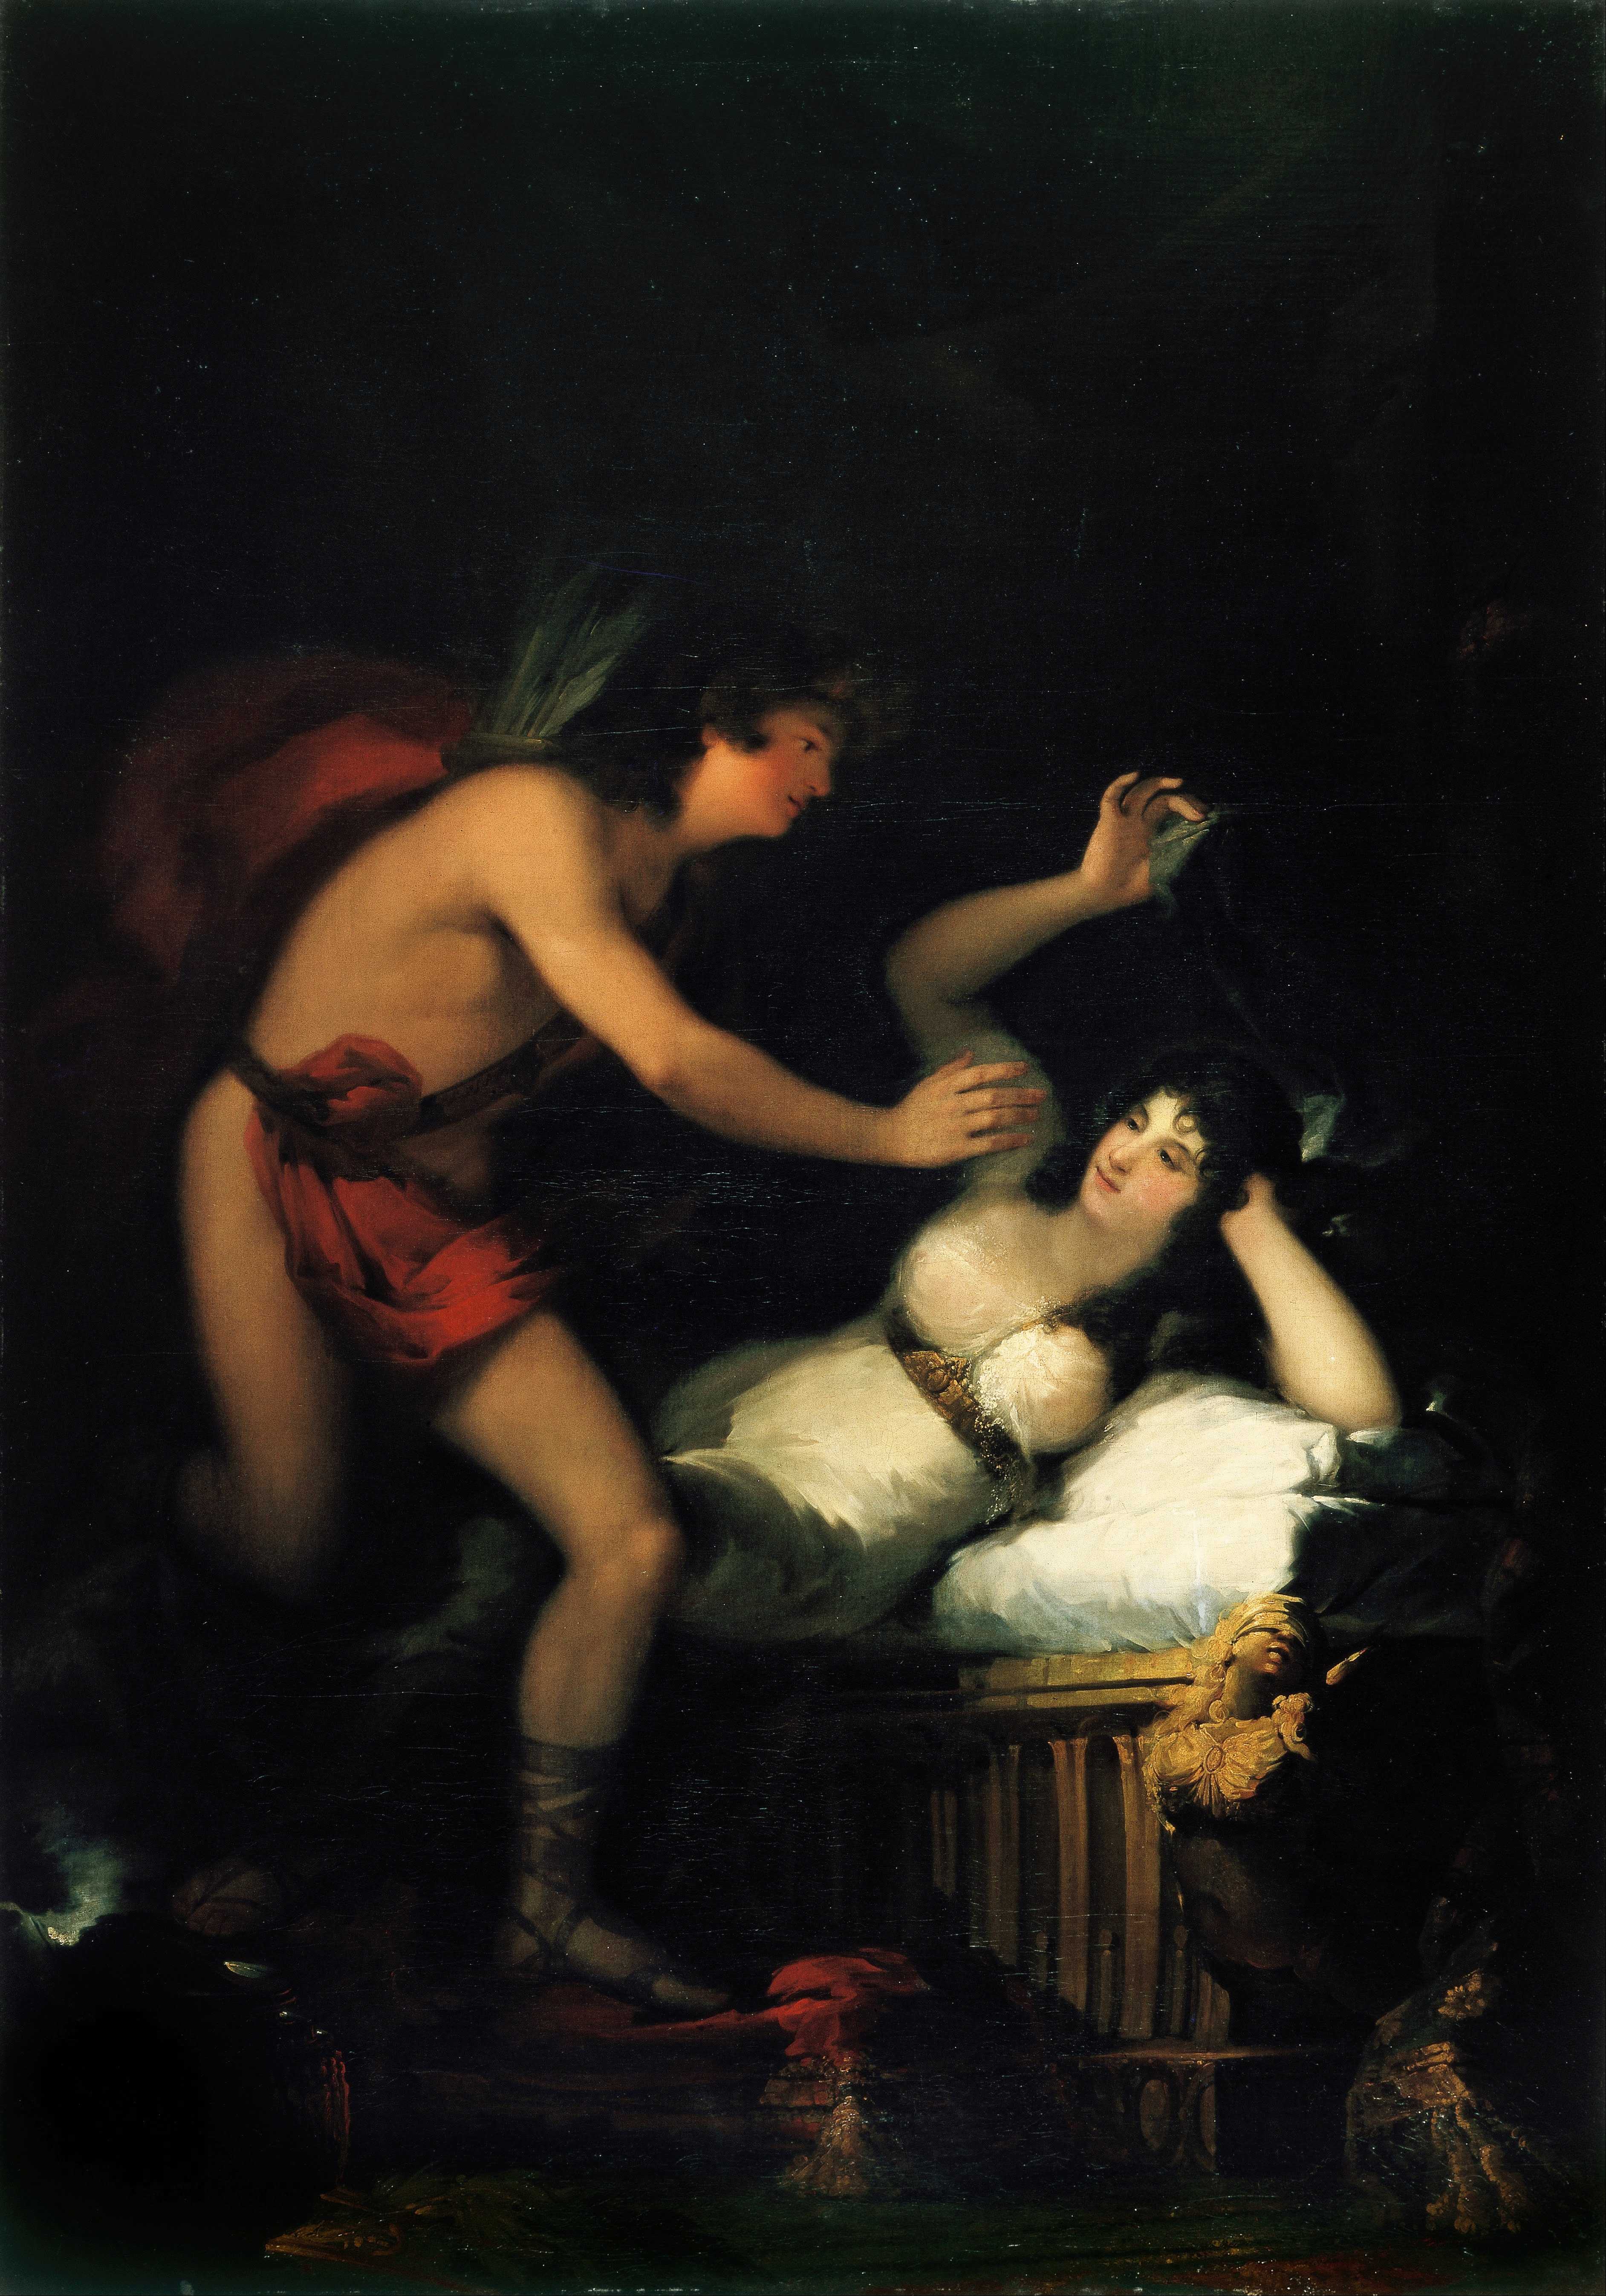 Find out more about Francisco de Goya - Allegory of Love, Cupid and Psyche